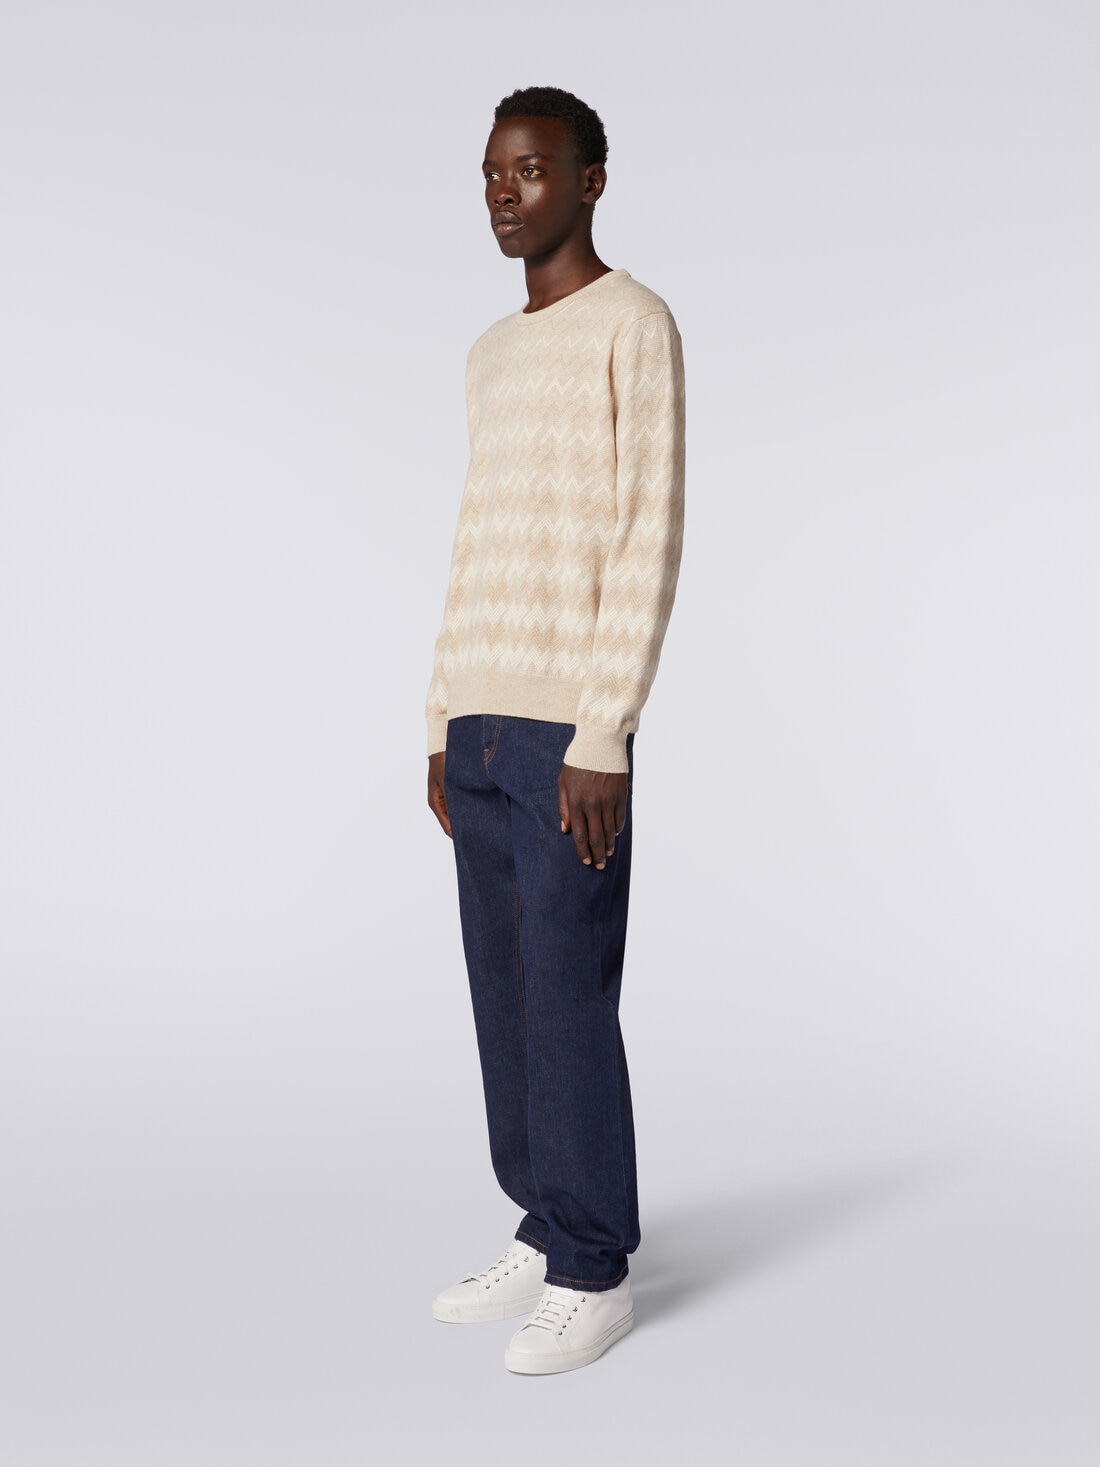 Cashmere crew-neck sweater with zigzags, White & Beige - US23WN0VBK033KS01AB - 2